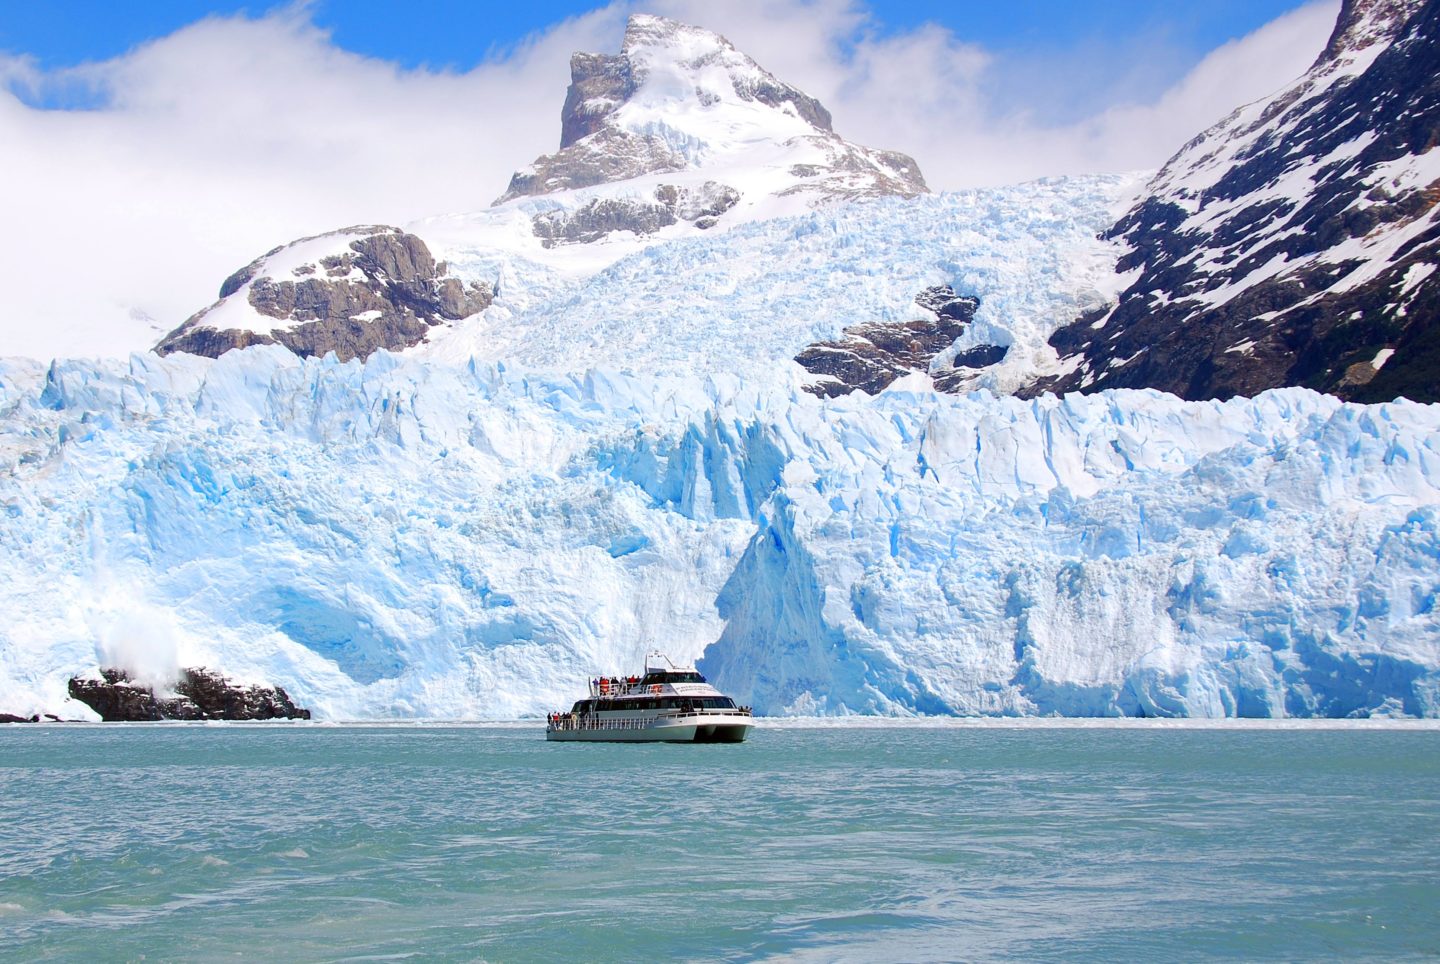 Boat cruising on calm waters, surrounded by blue glacier that extends from the base of snow-covered mountains.